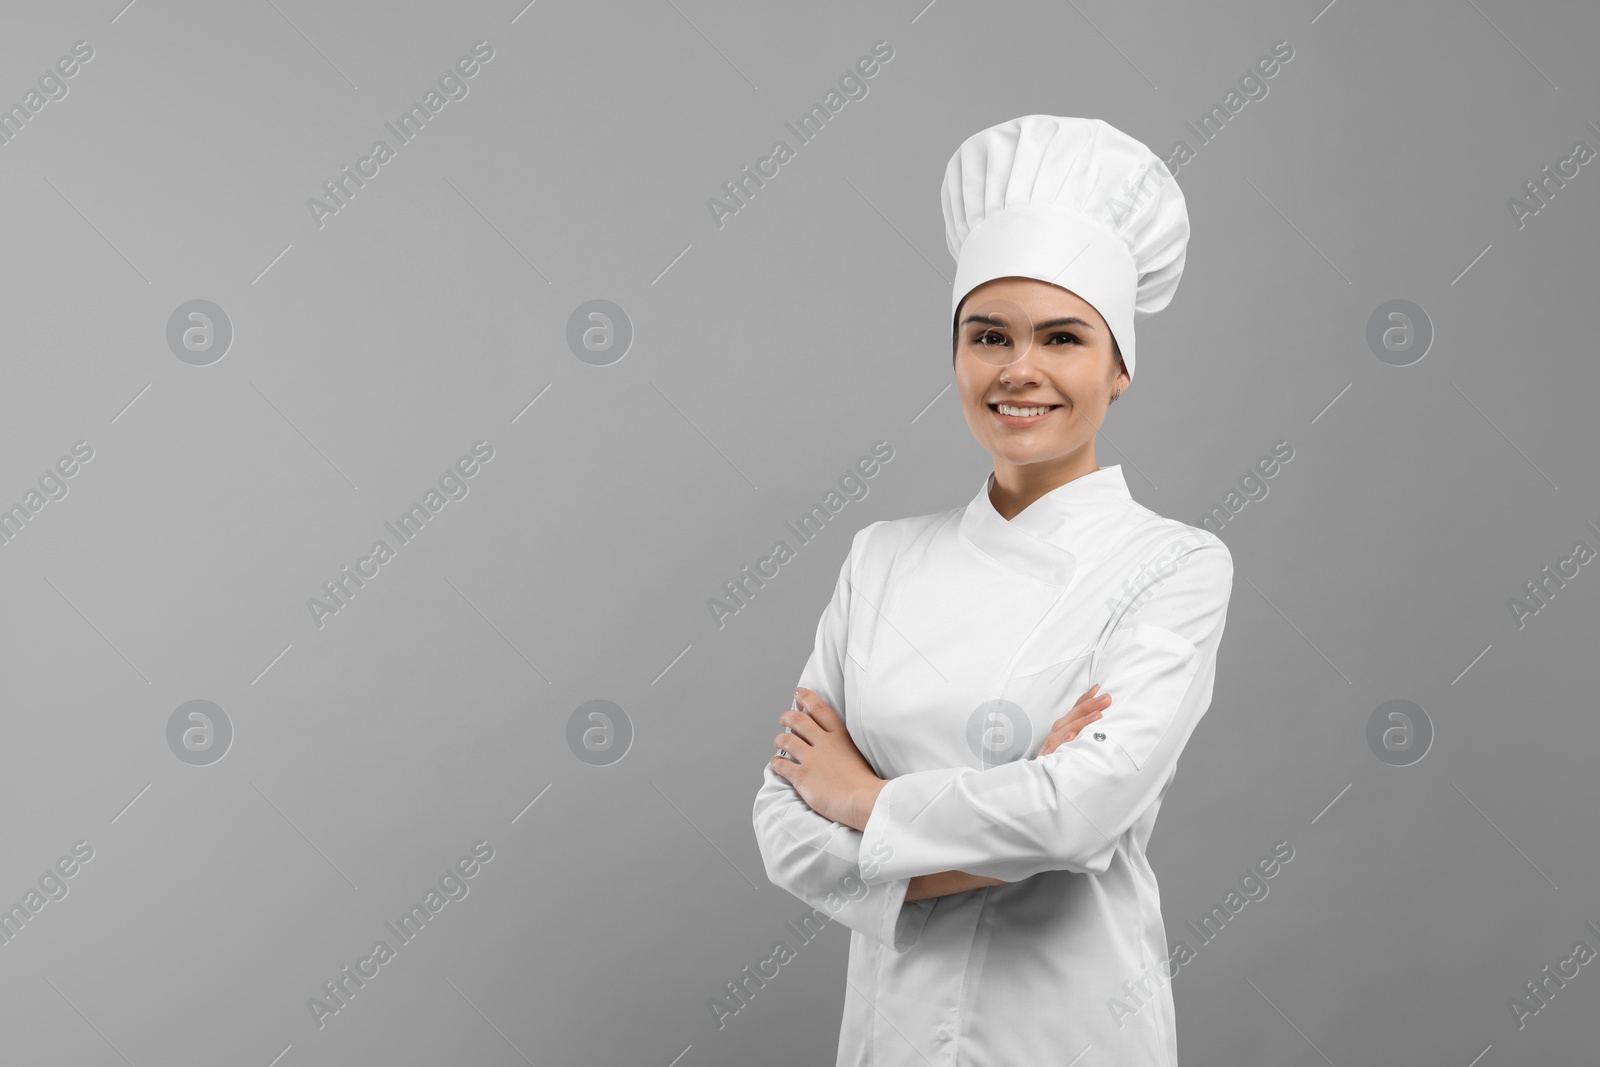 Photo of Happy female chef wearing uniform and cap on light grey background. Space for text